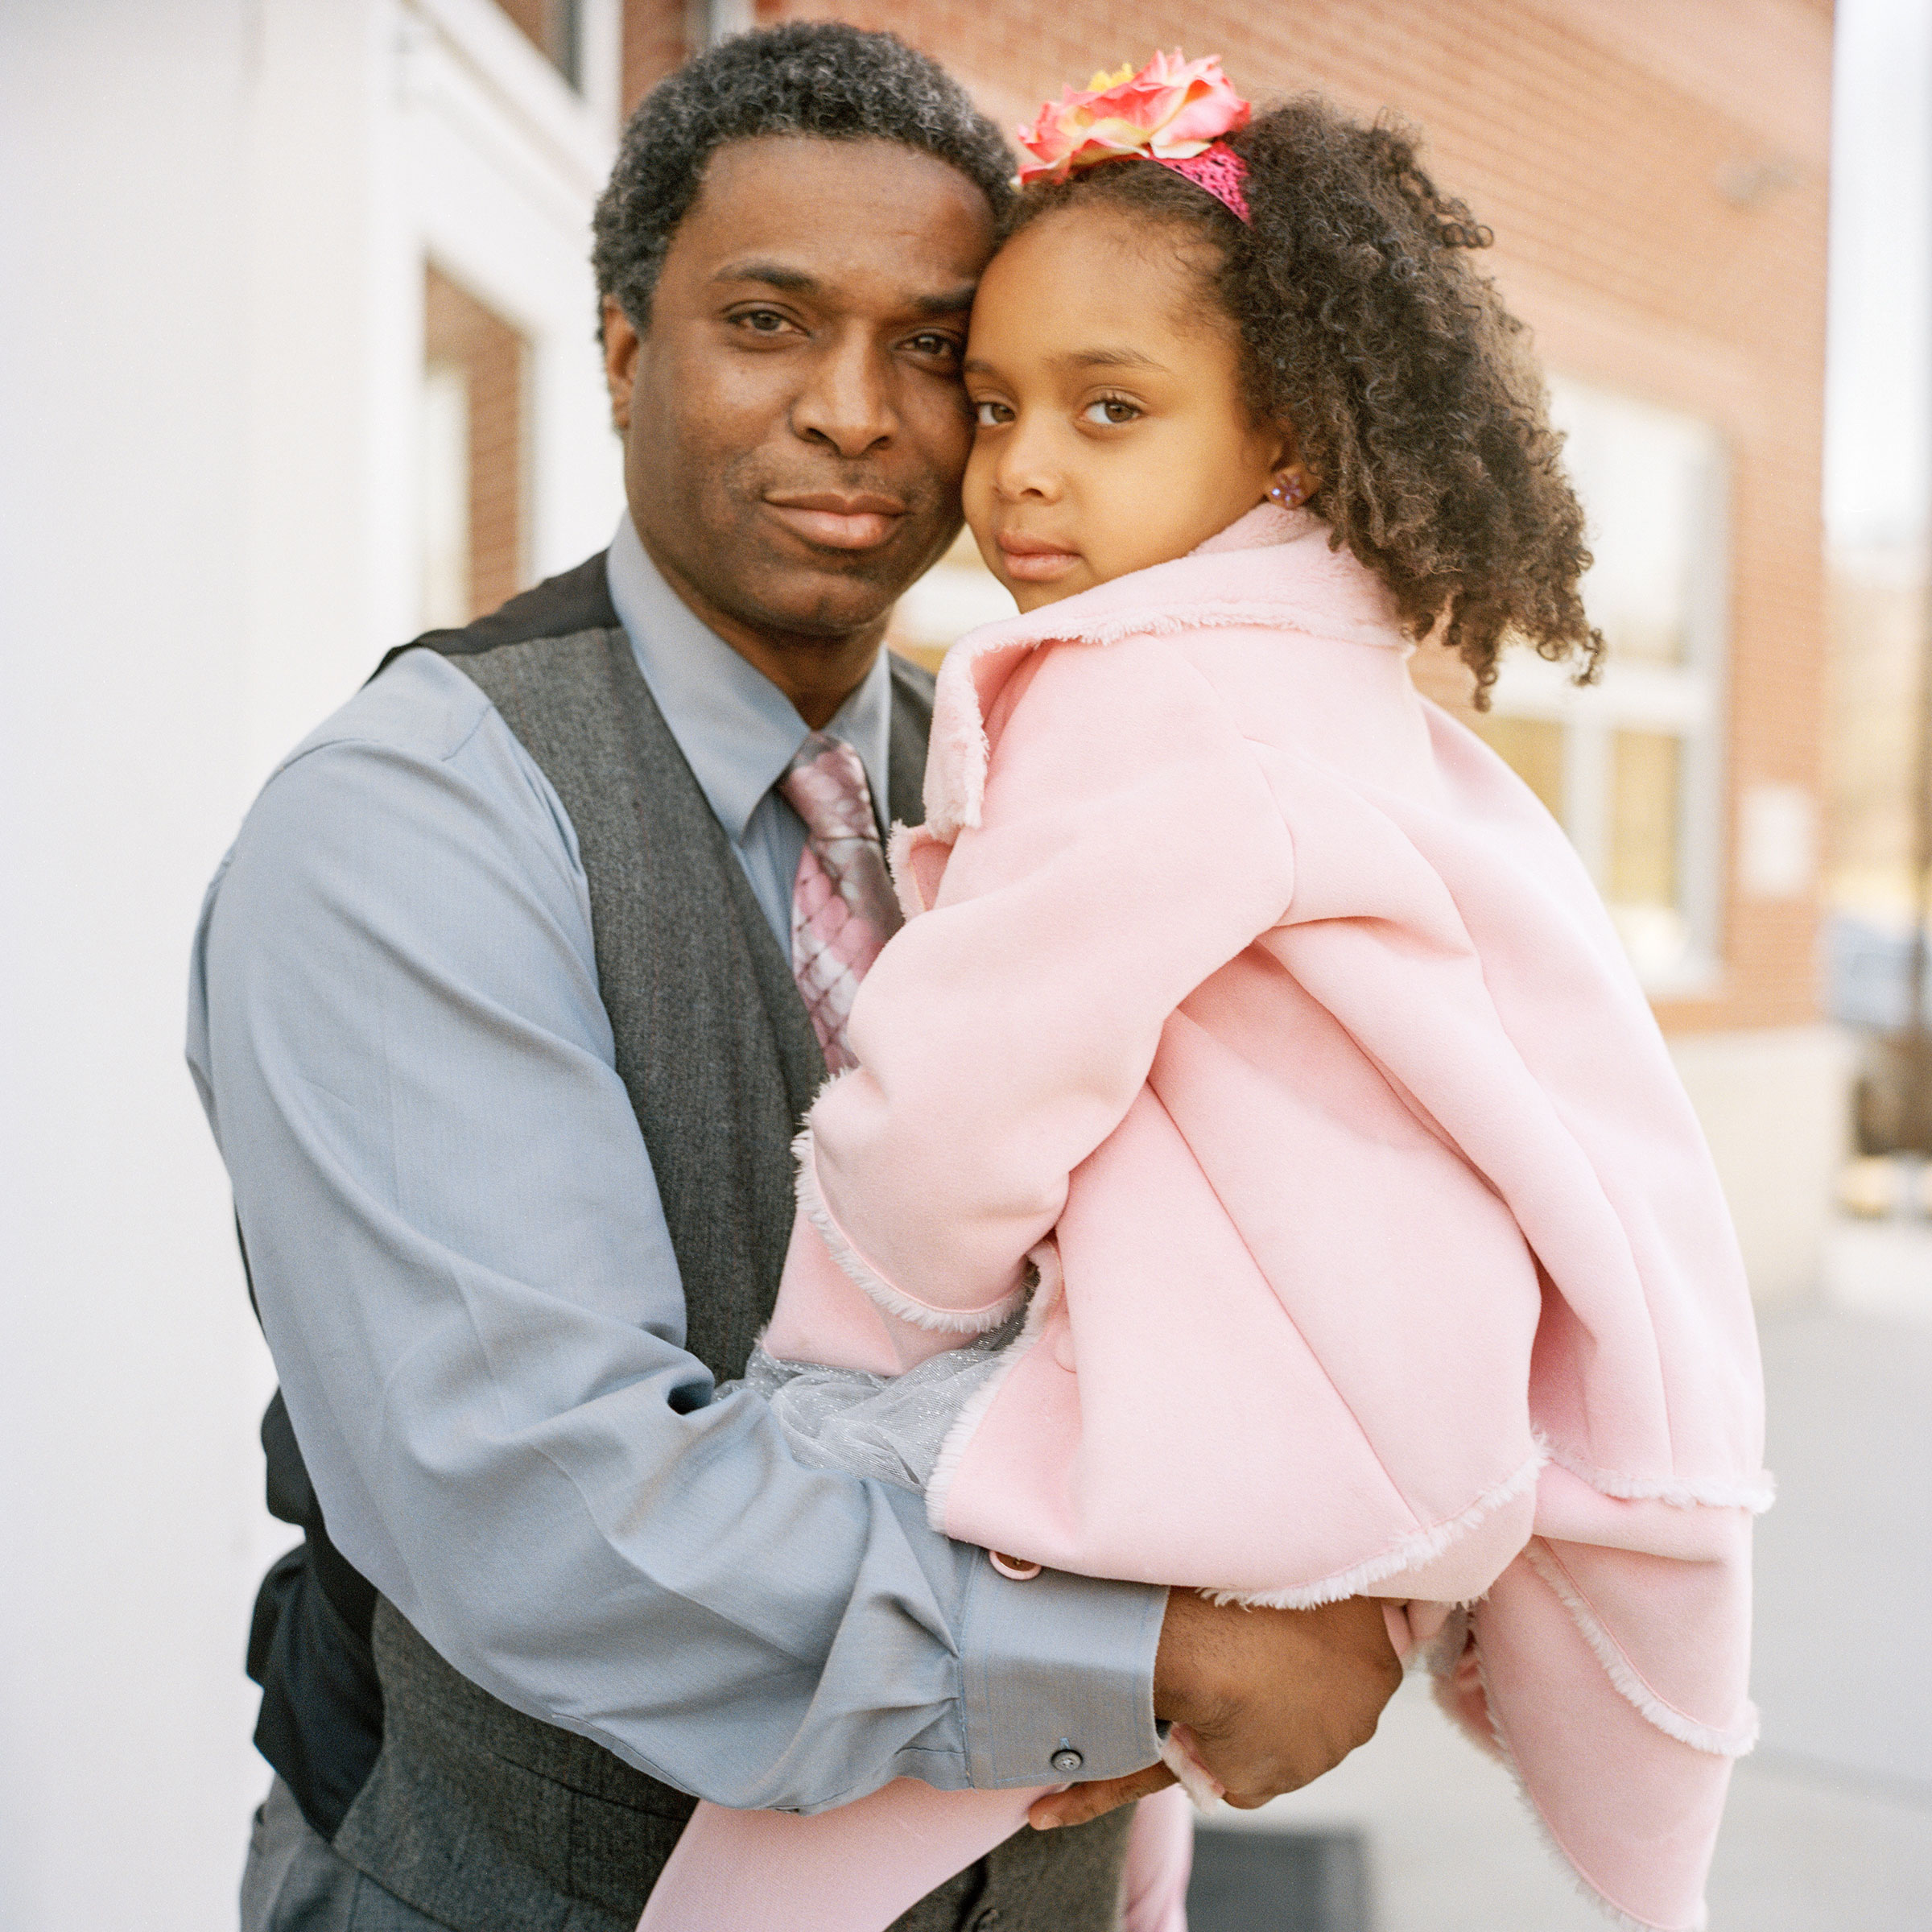 Julius and his daughter, Havana, at the “Date with Dad” dance, Richmond, VA 2015